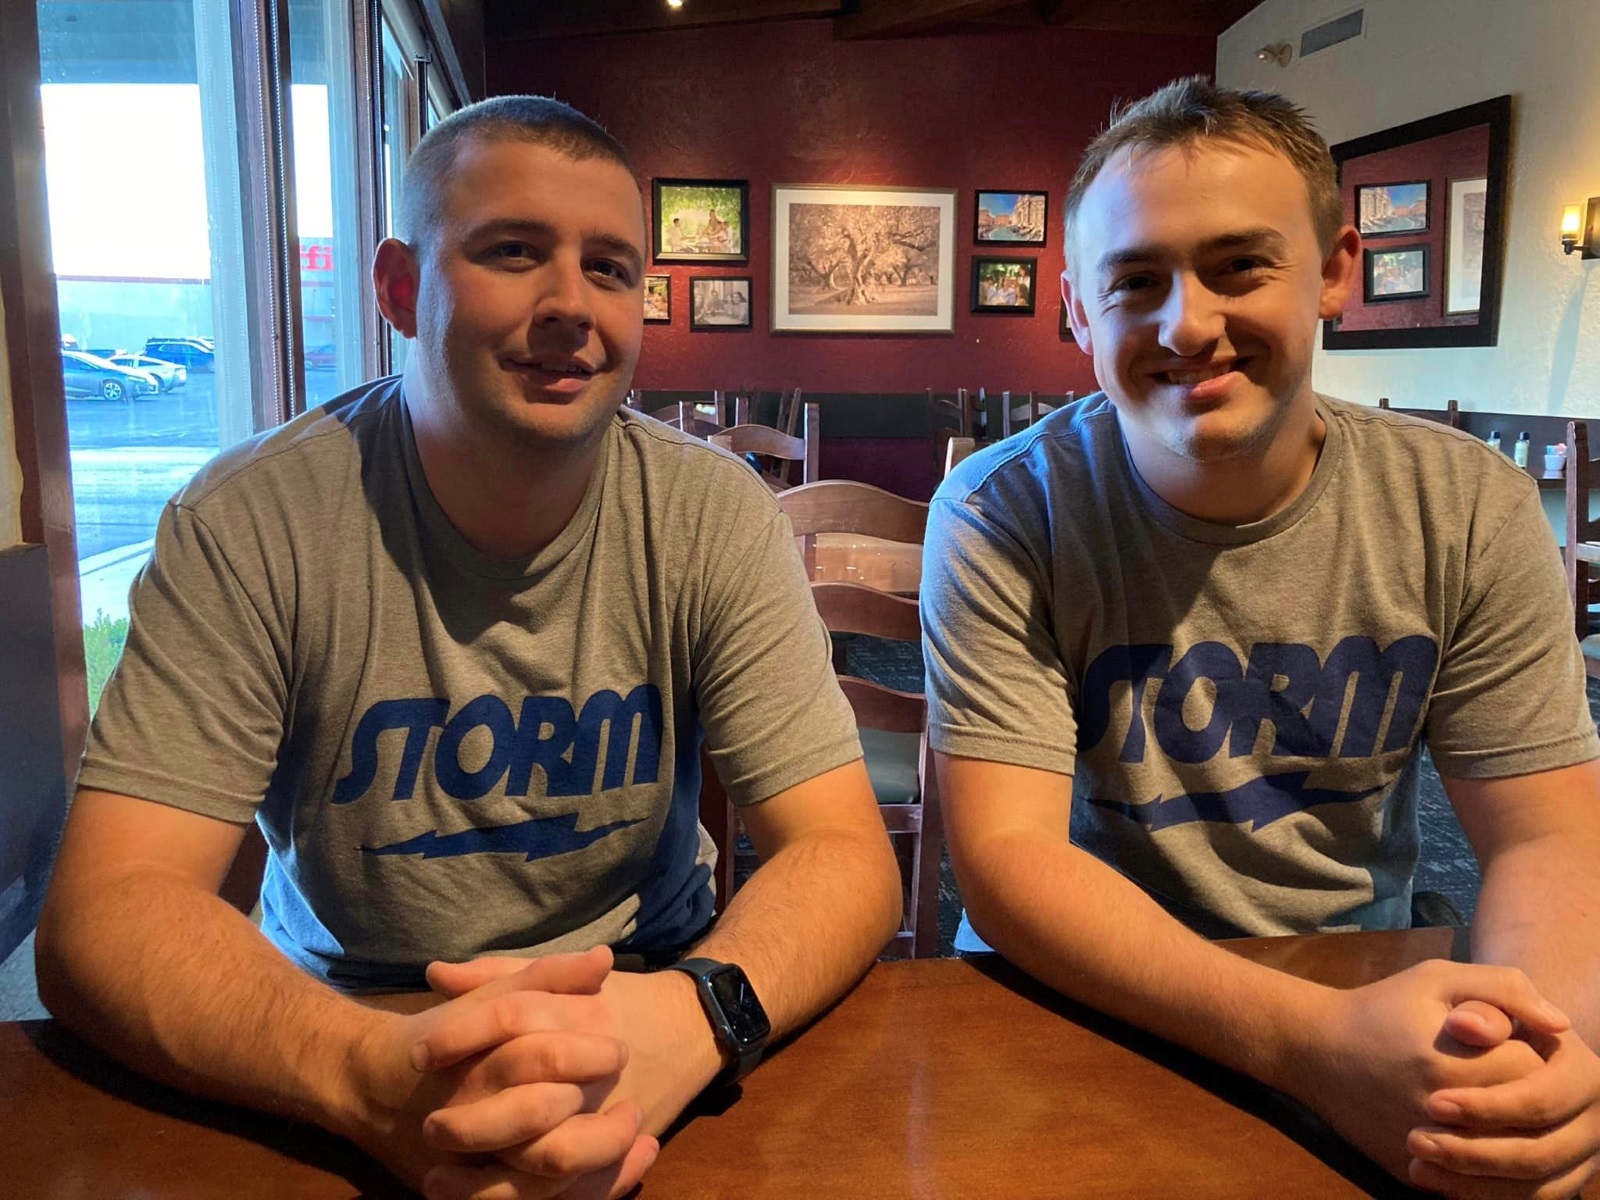 Brothers Blake Demore and Spencer Robarge sit side by side in matching gray T-shirts with the word "Storm" printed on them in blue.